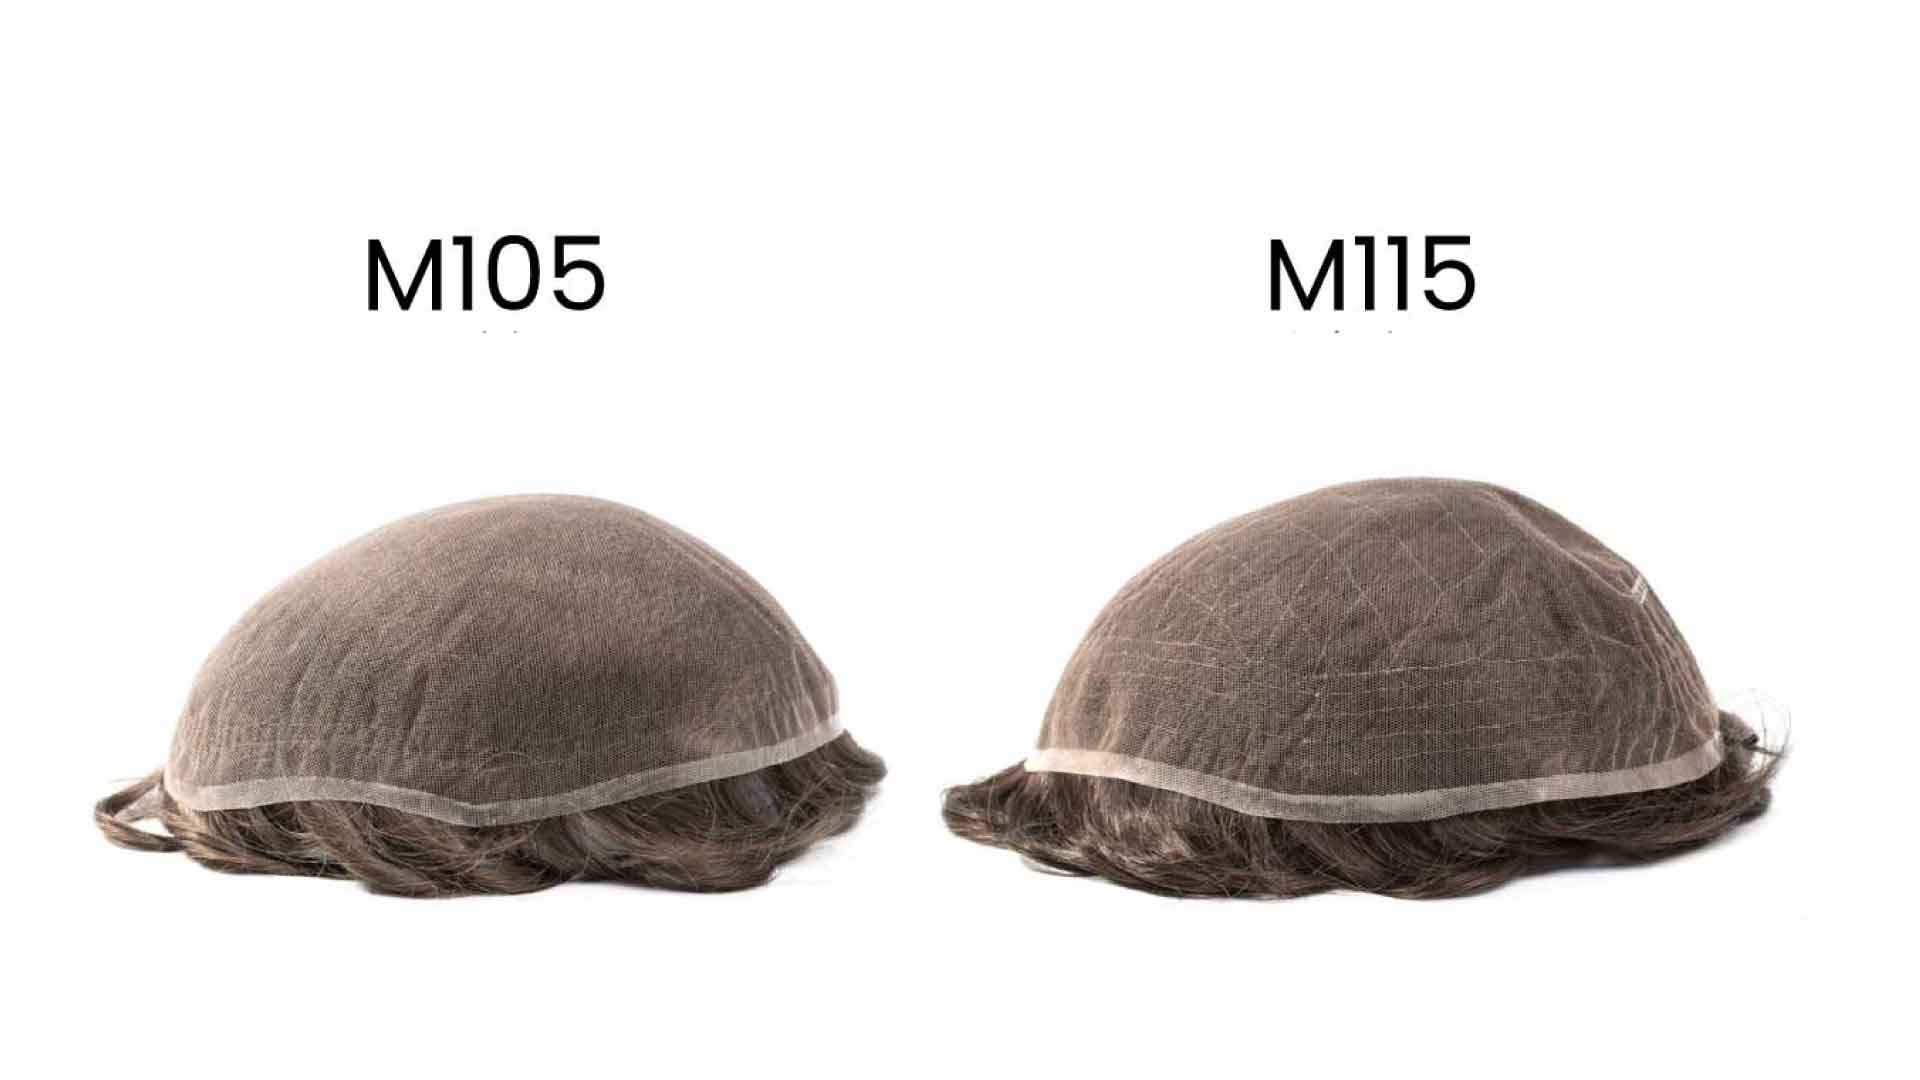 M105 and M115